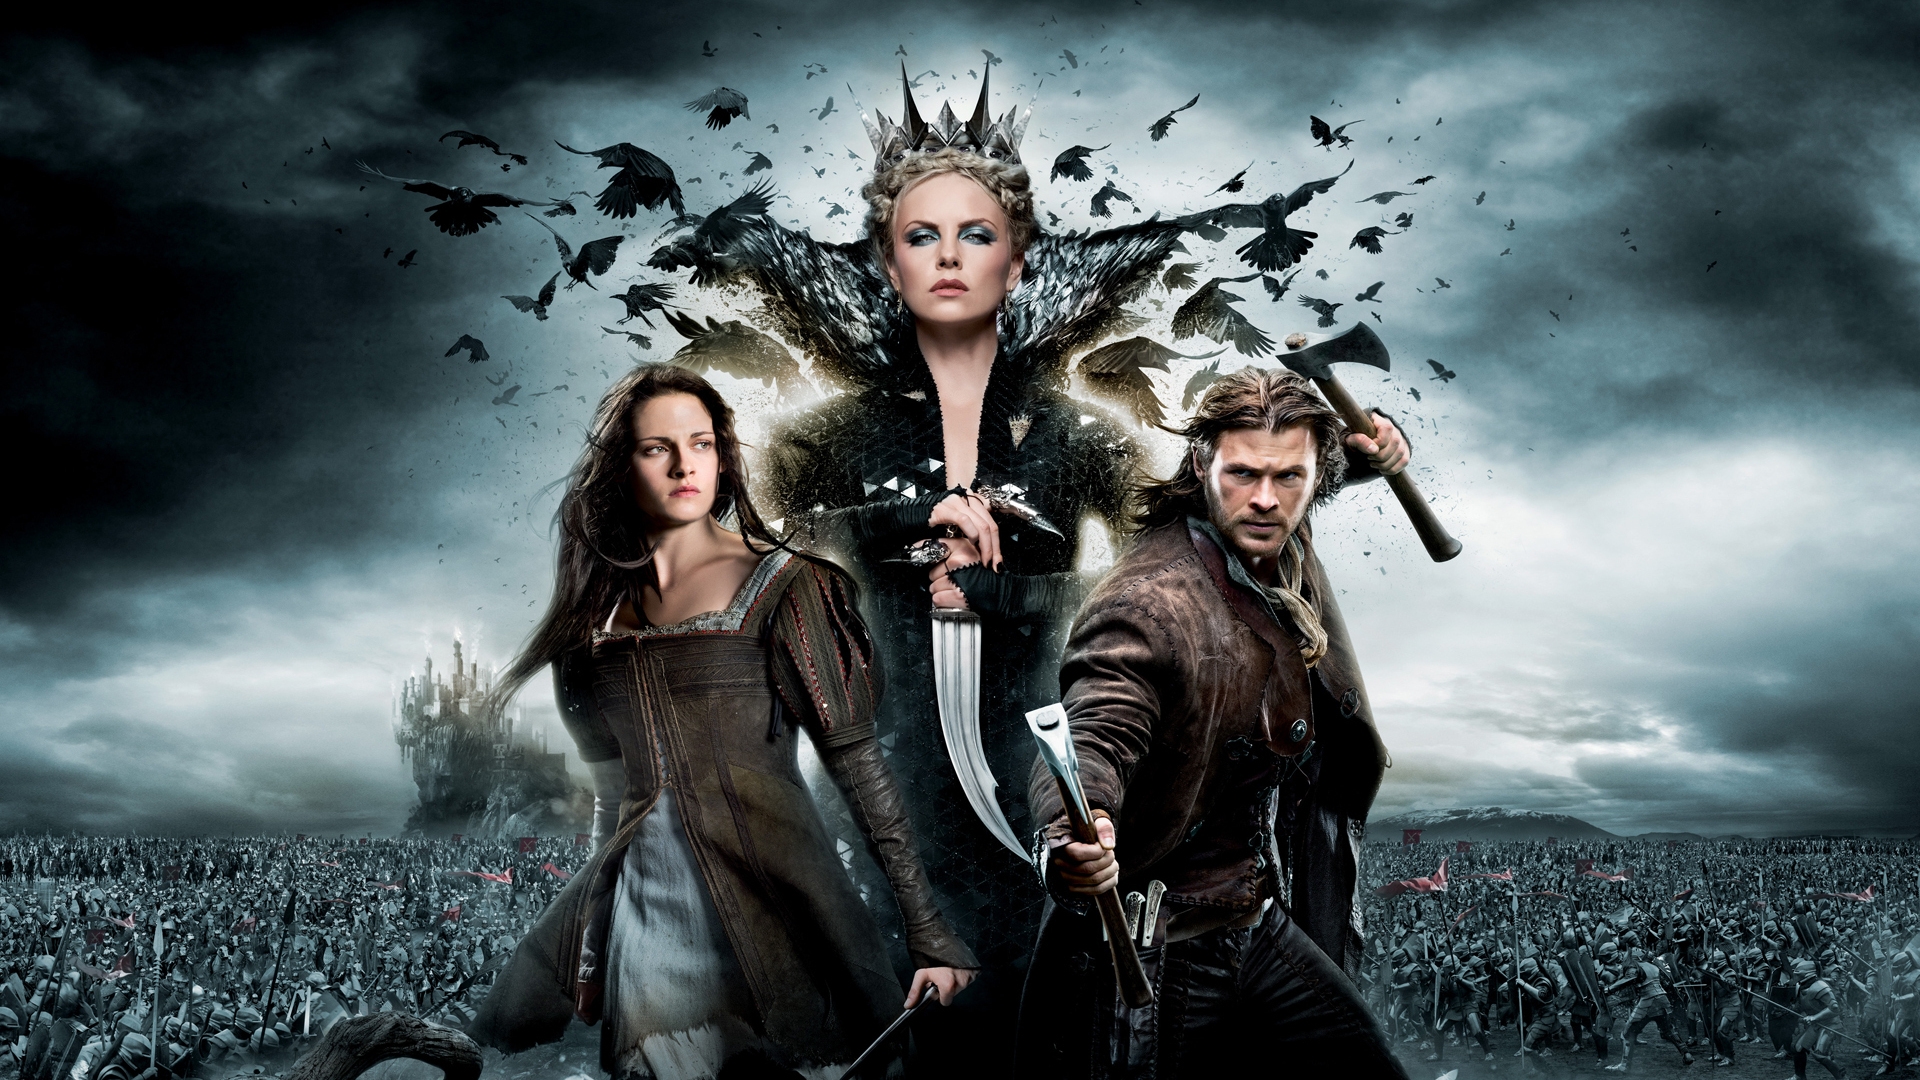 Lovely Snow White and The Huntsman for 1920 x 1080 HDTV 1080p resolution